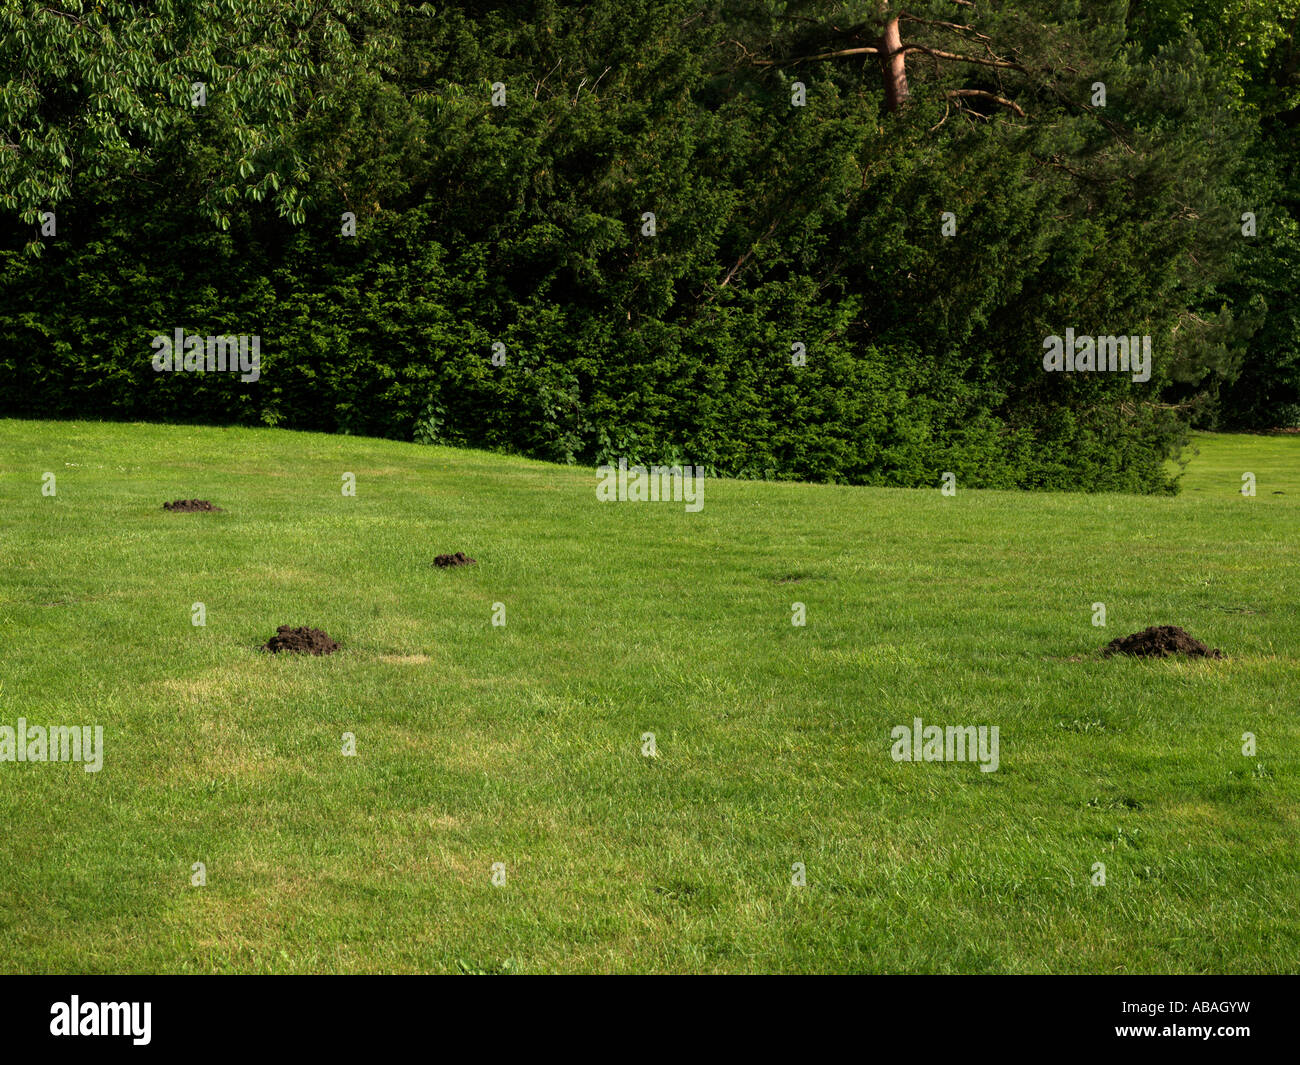 English Garden Lawn with Mole Hills Stock Photo